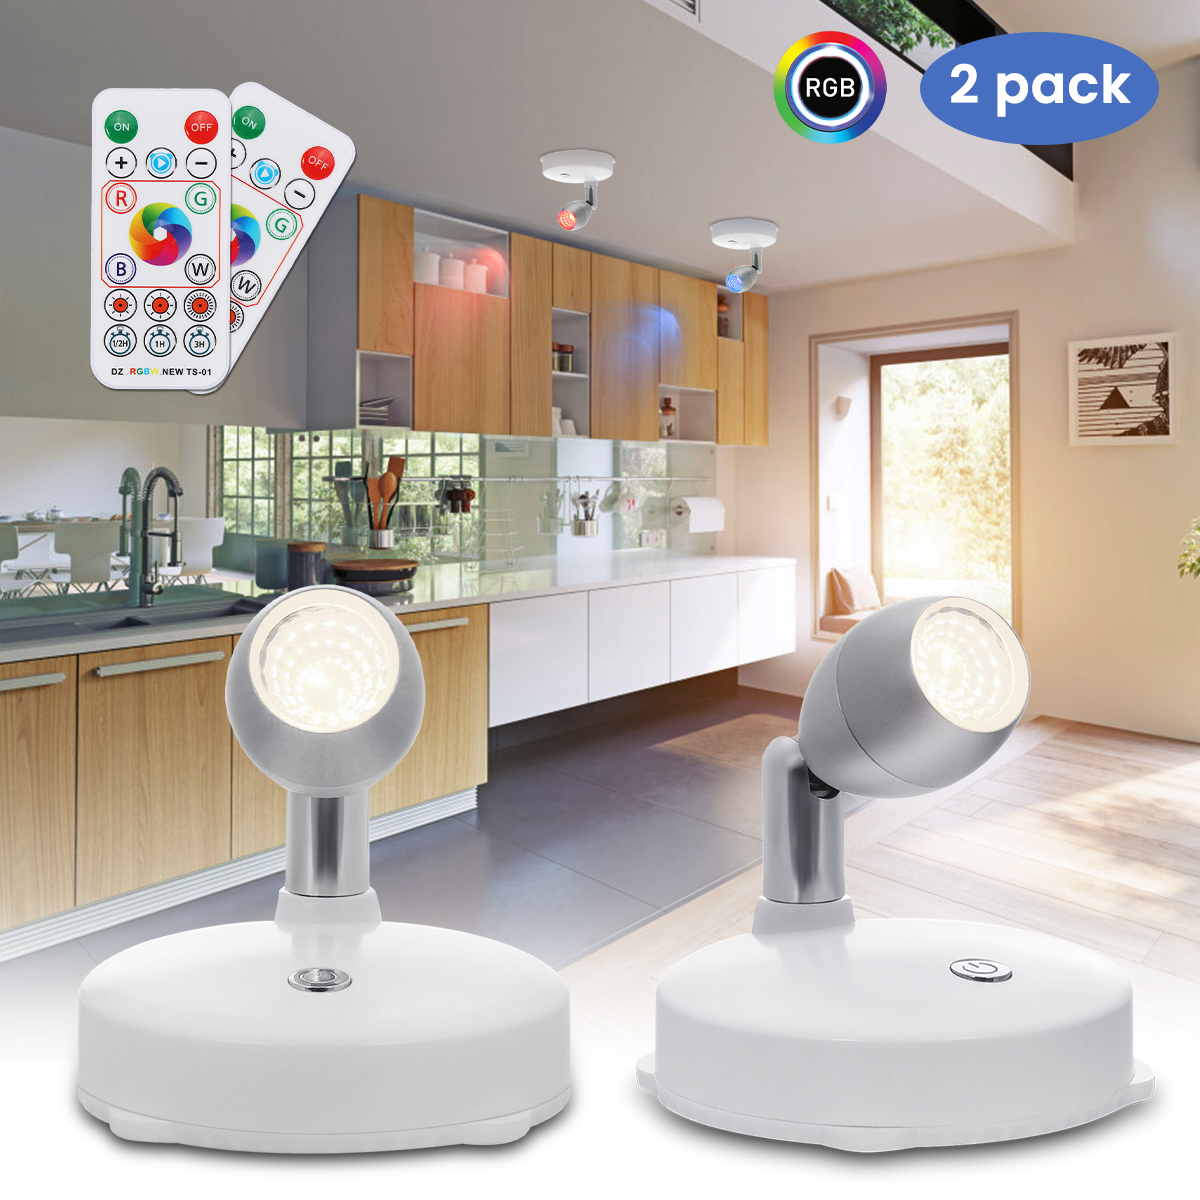 2PCS-Elfeland-Battery-Powered-RGB-LED-Cabinet-Light-Spotlights-with-Two-Remote-Controls-for-Wardrobe-1715076-1